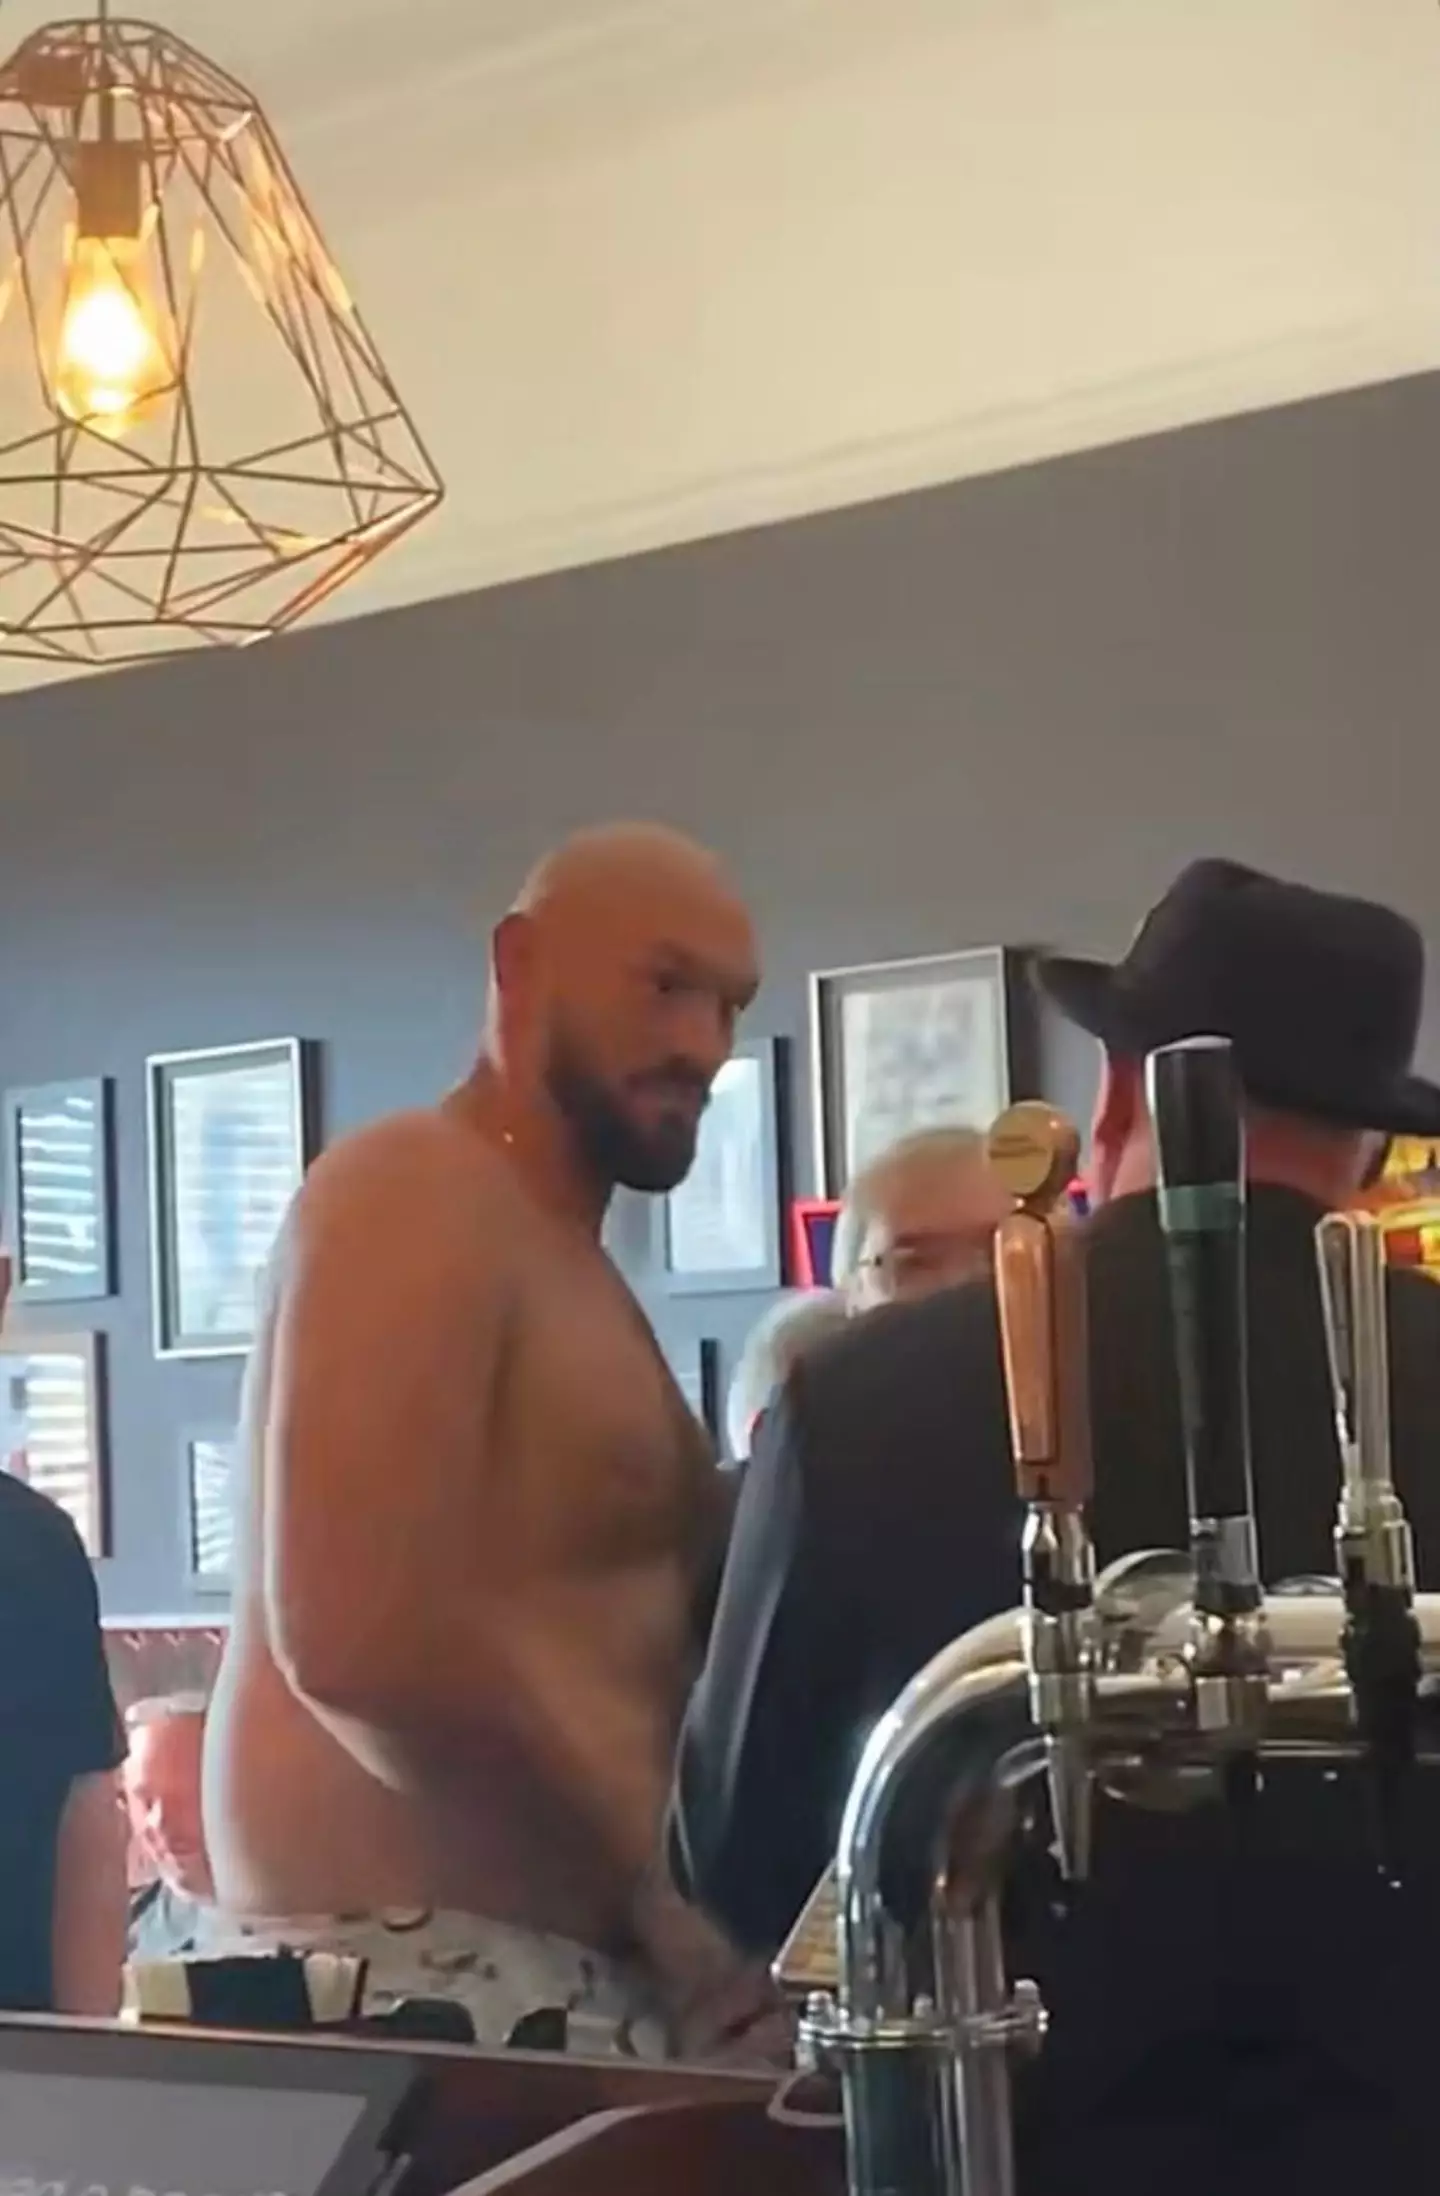 Tyson Fury whipped his top off during a trip to the pub with his mates.